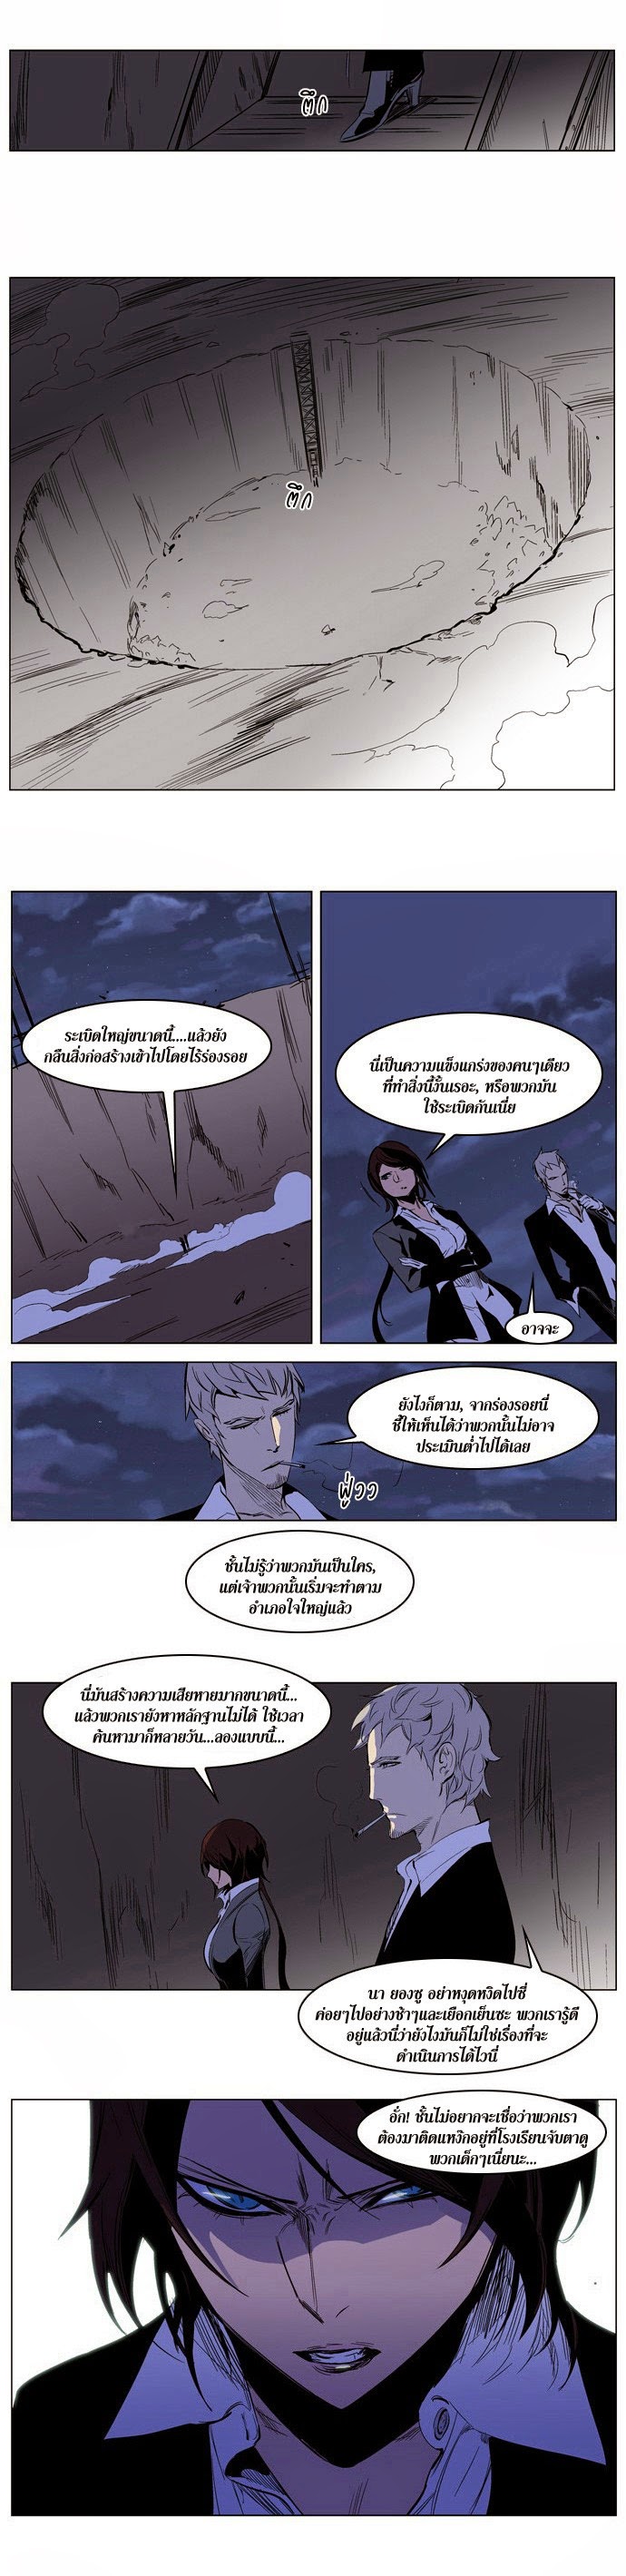 Noblesse 206 010